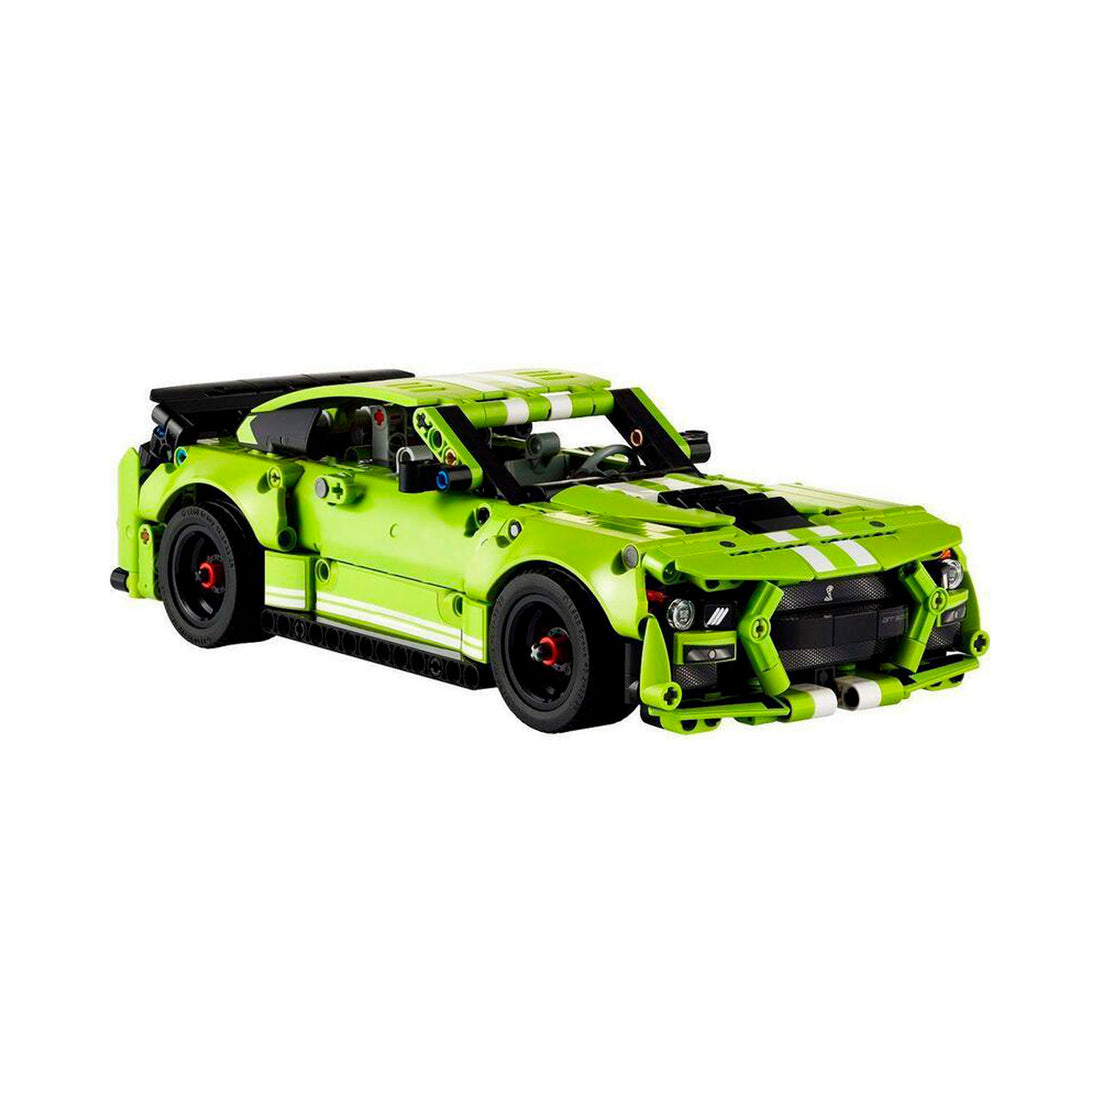 LEGO Technic - Ford Mustang Shelby GT500